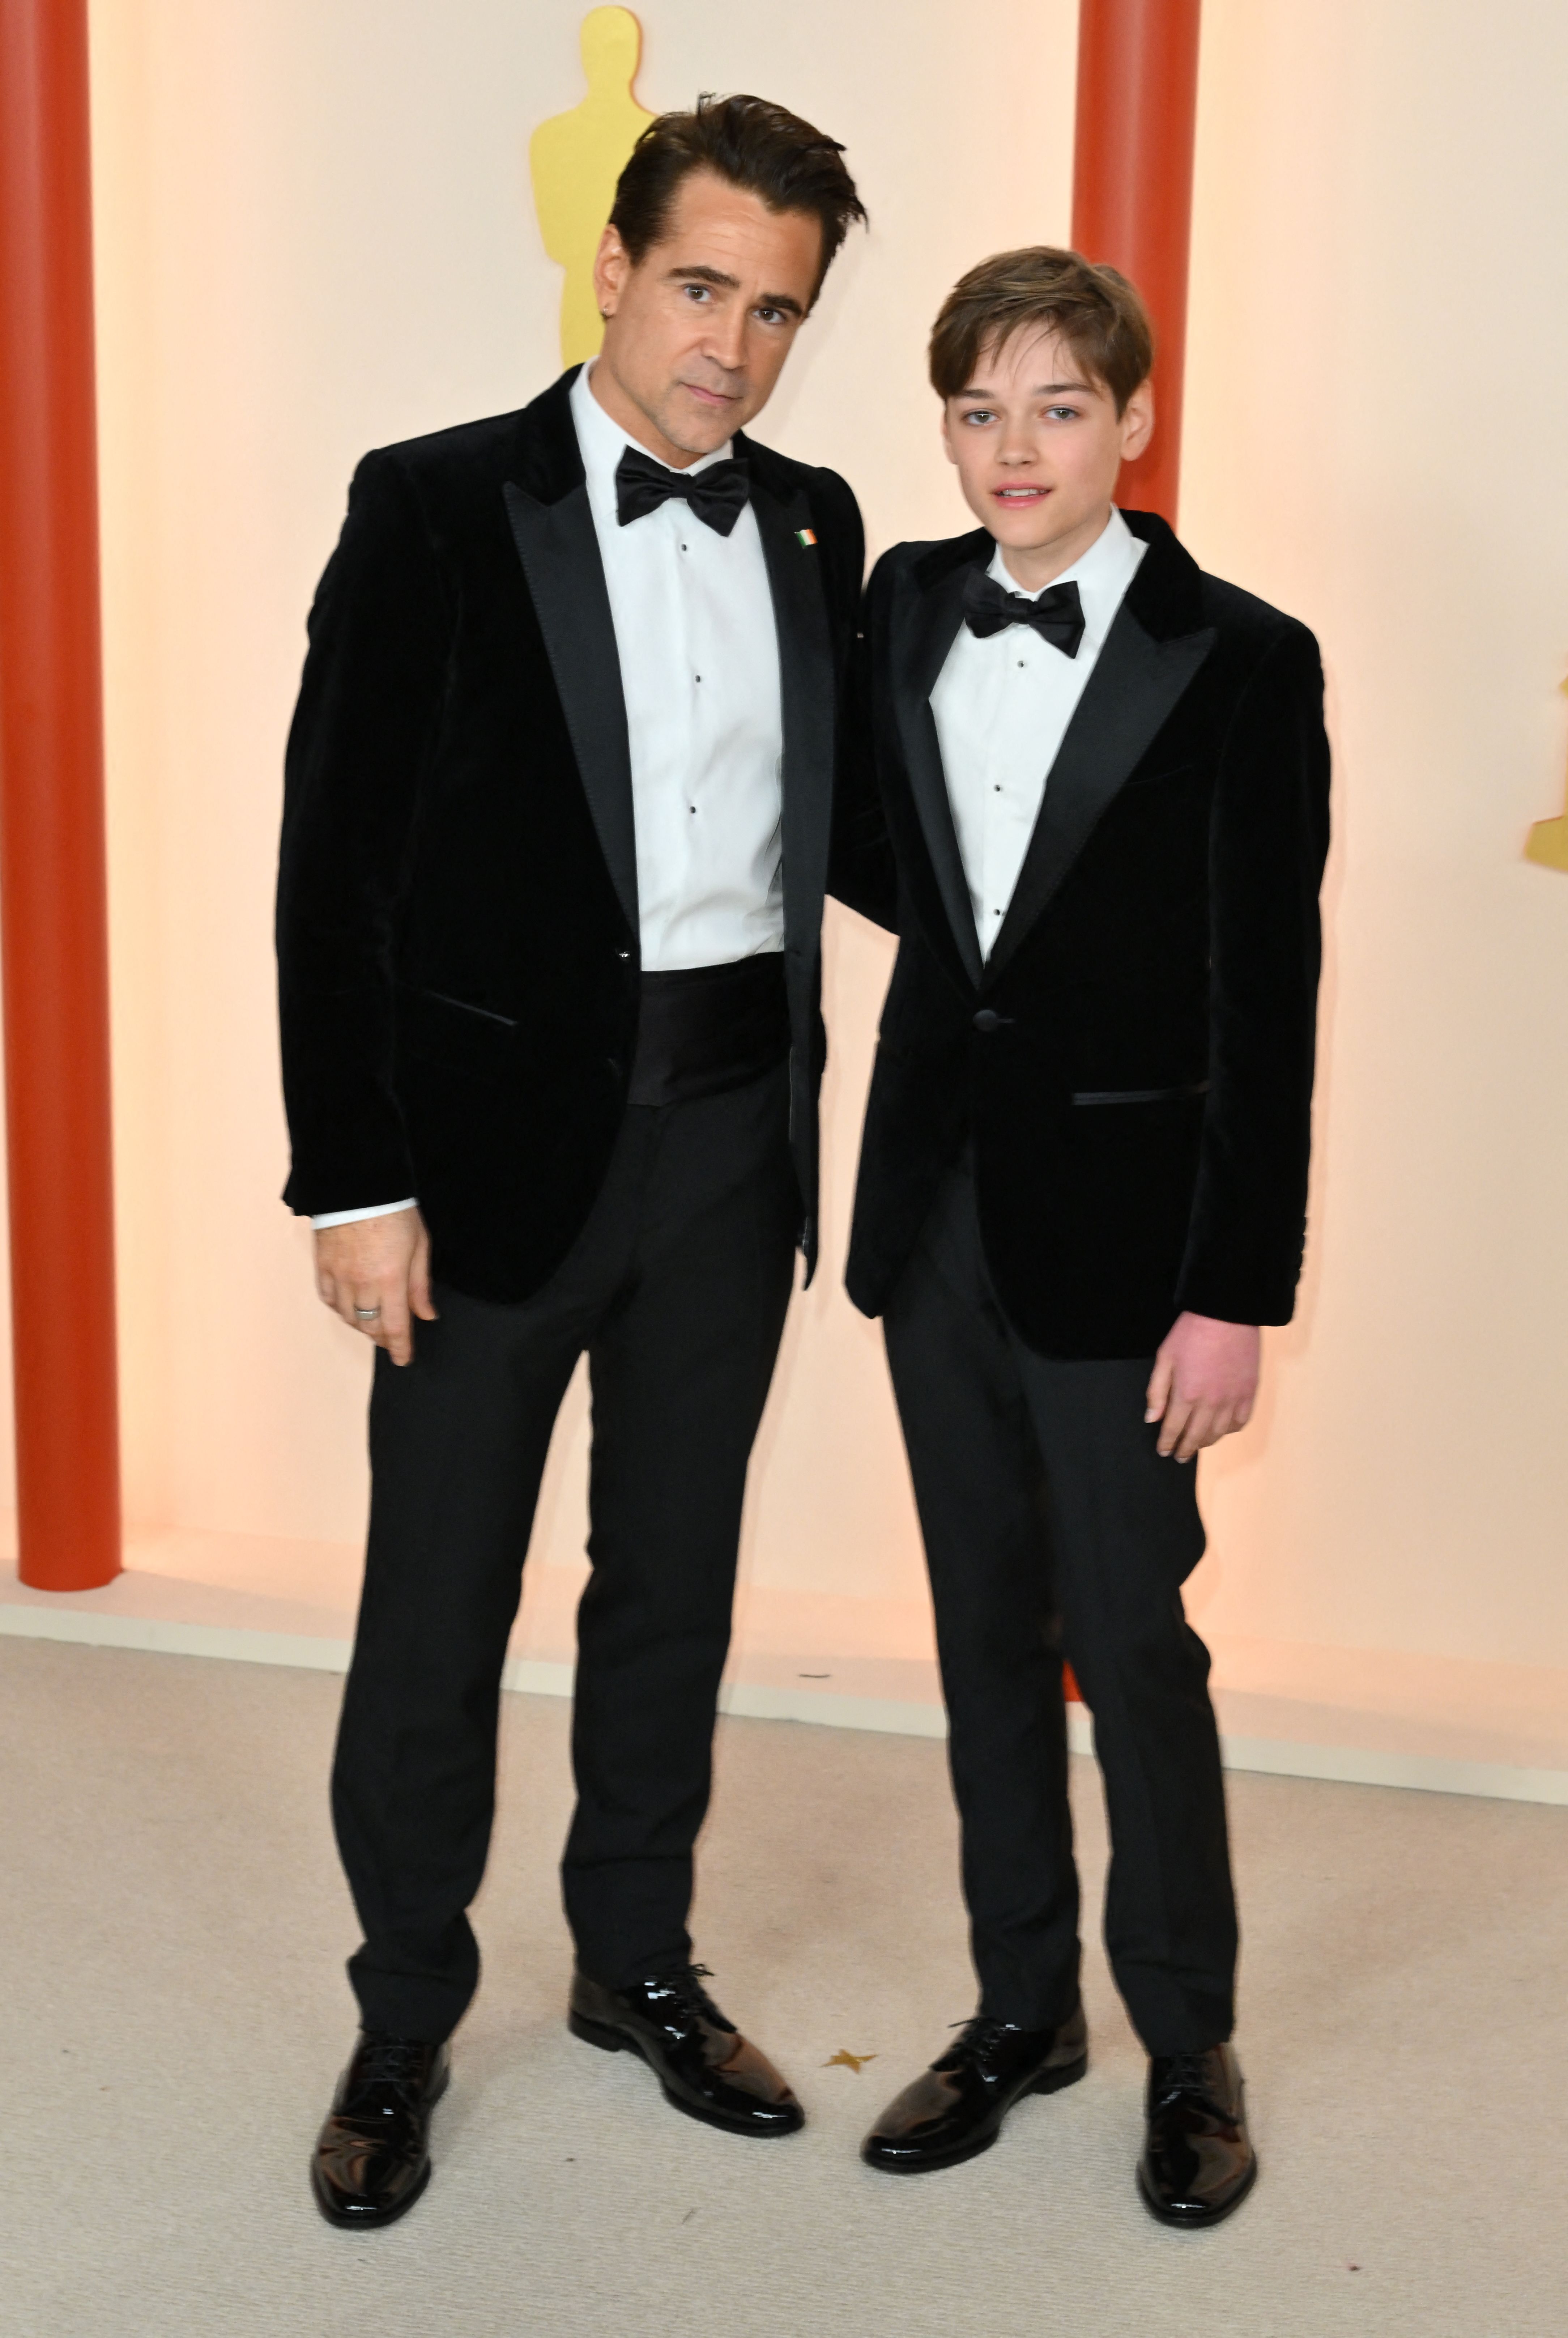 Colin Farrell and his son Henry at the Academy Awards on March 12, 2023, in Hollywood, California | Source: Getty Images